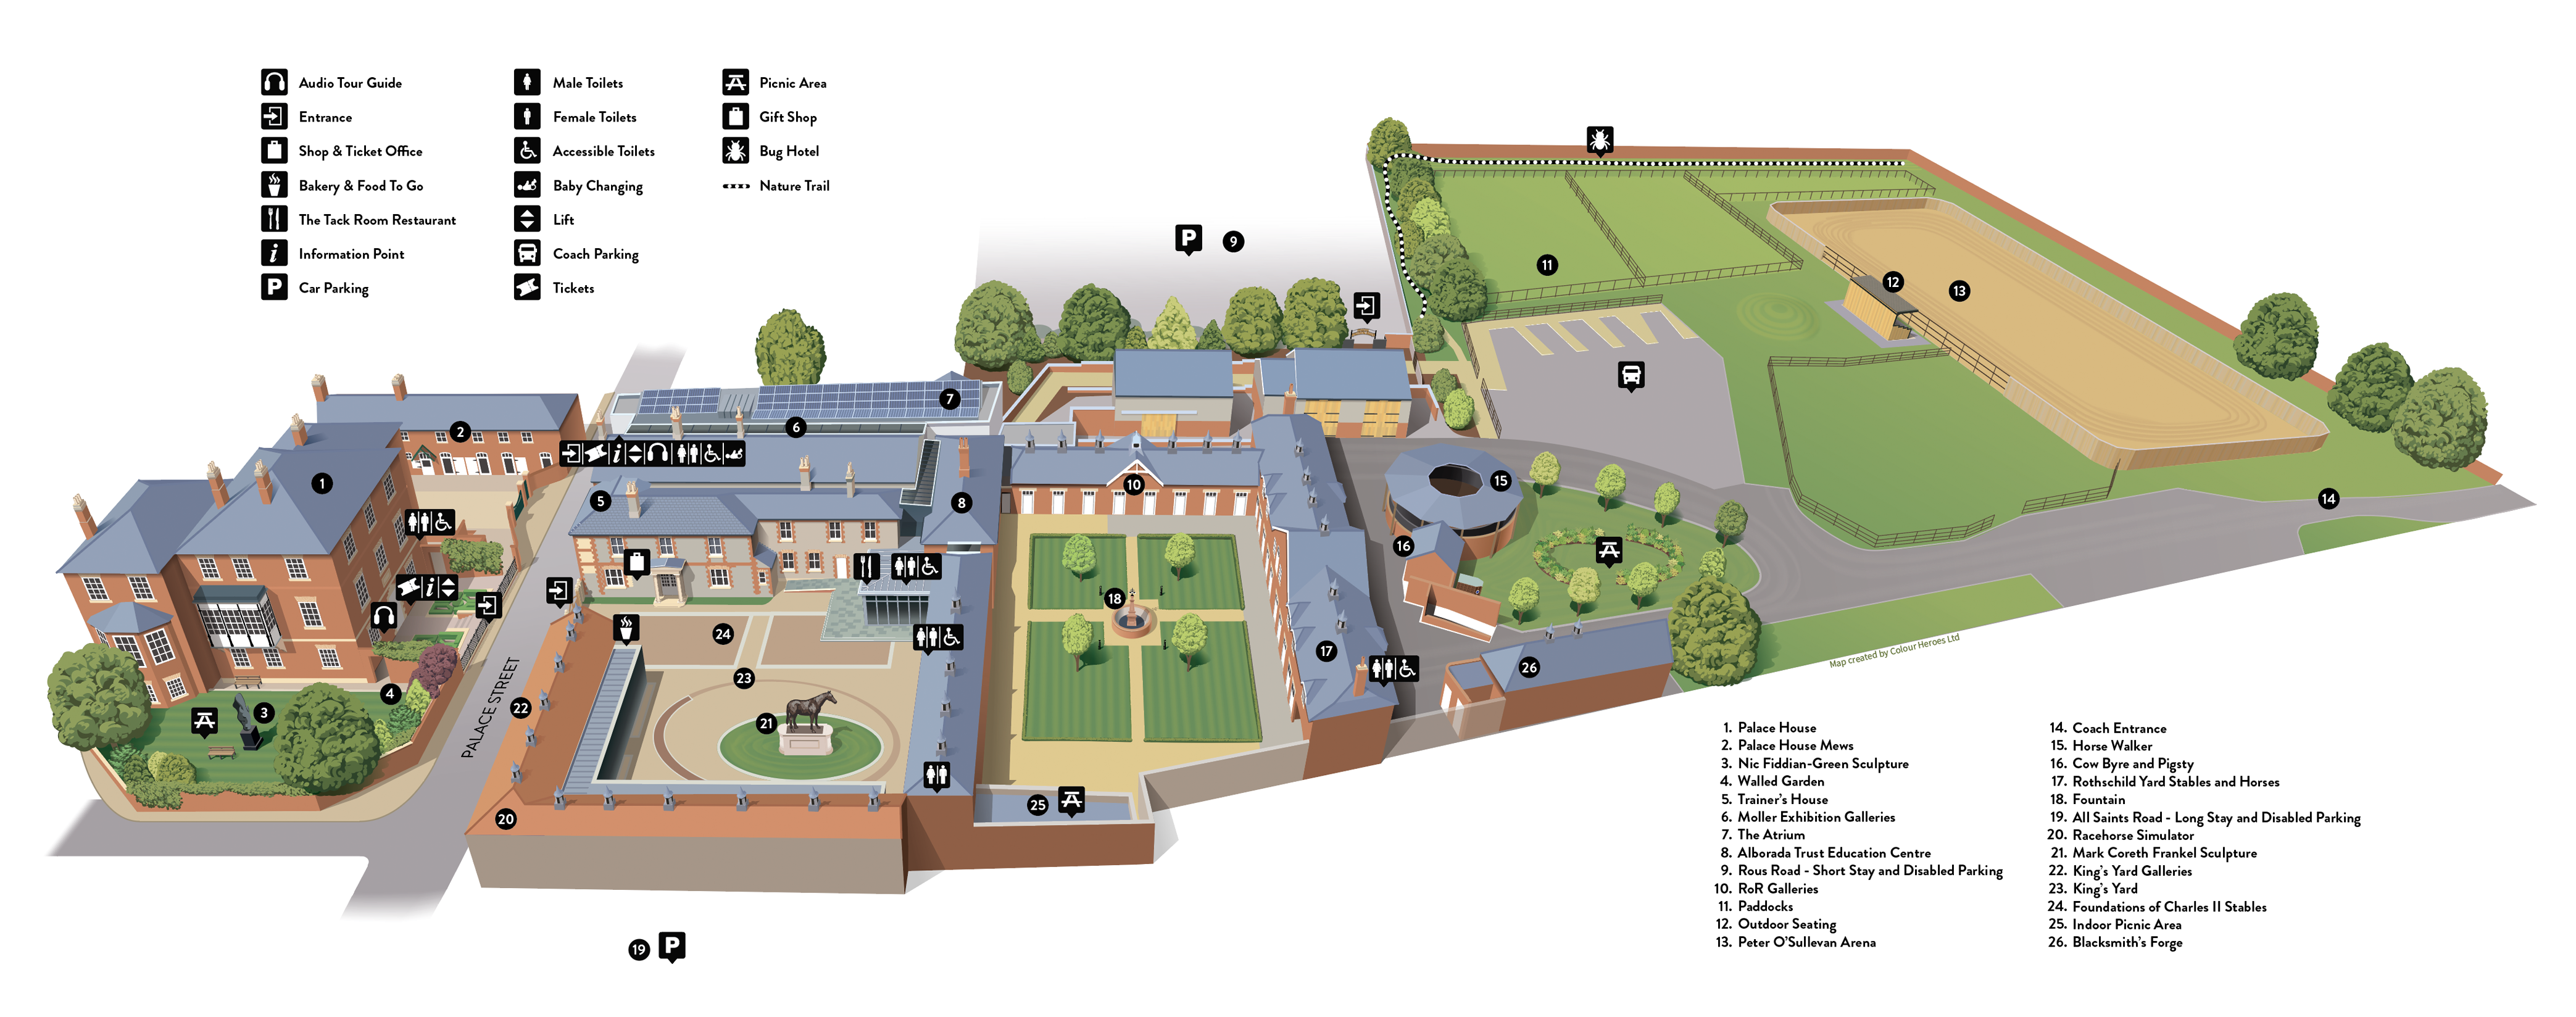 Explore the National Horseracing Museum - Site Map with Key